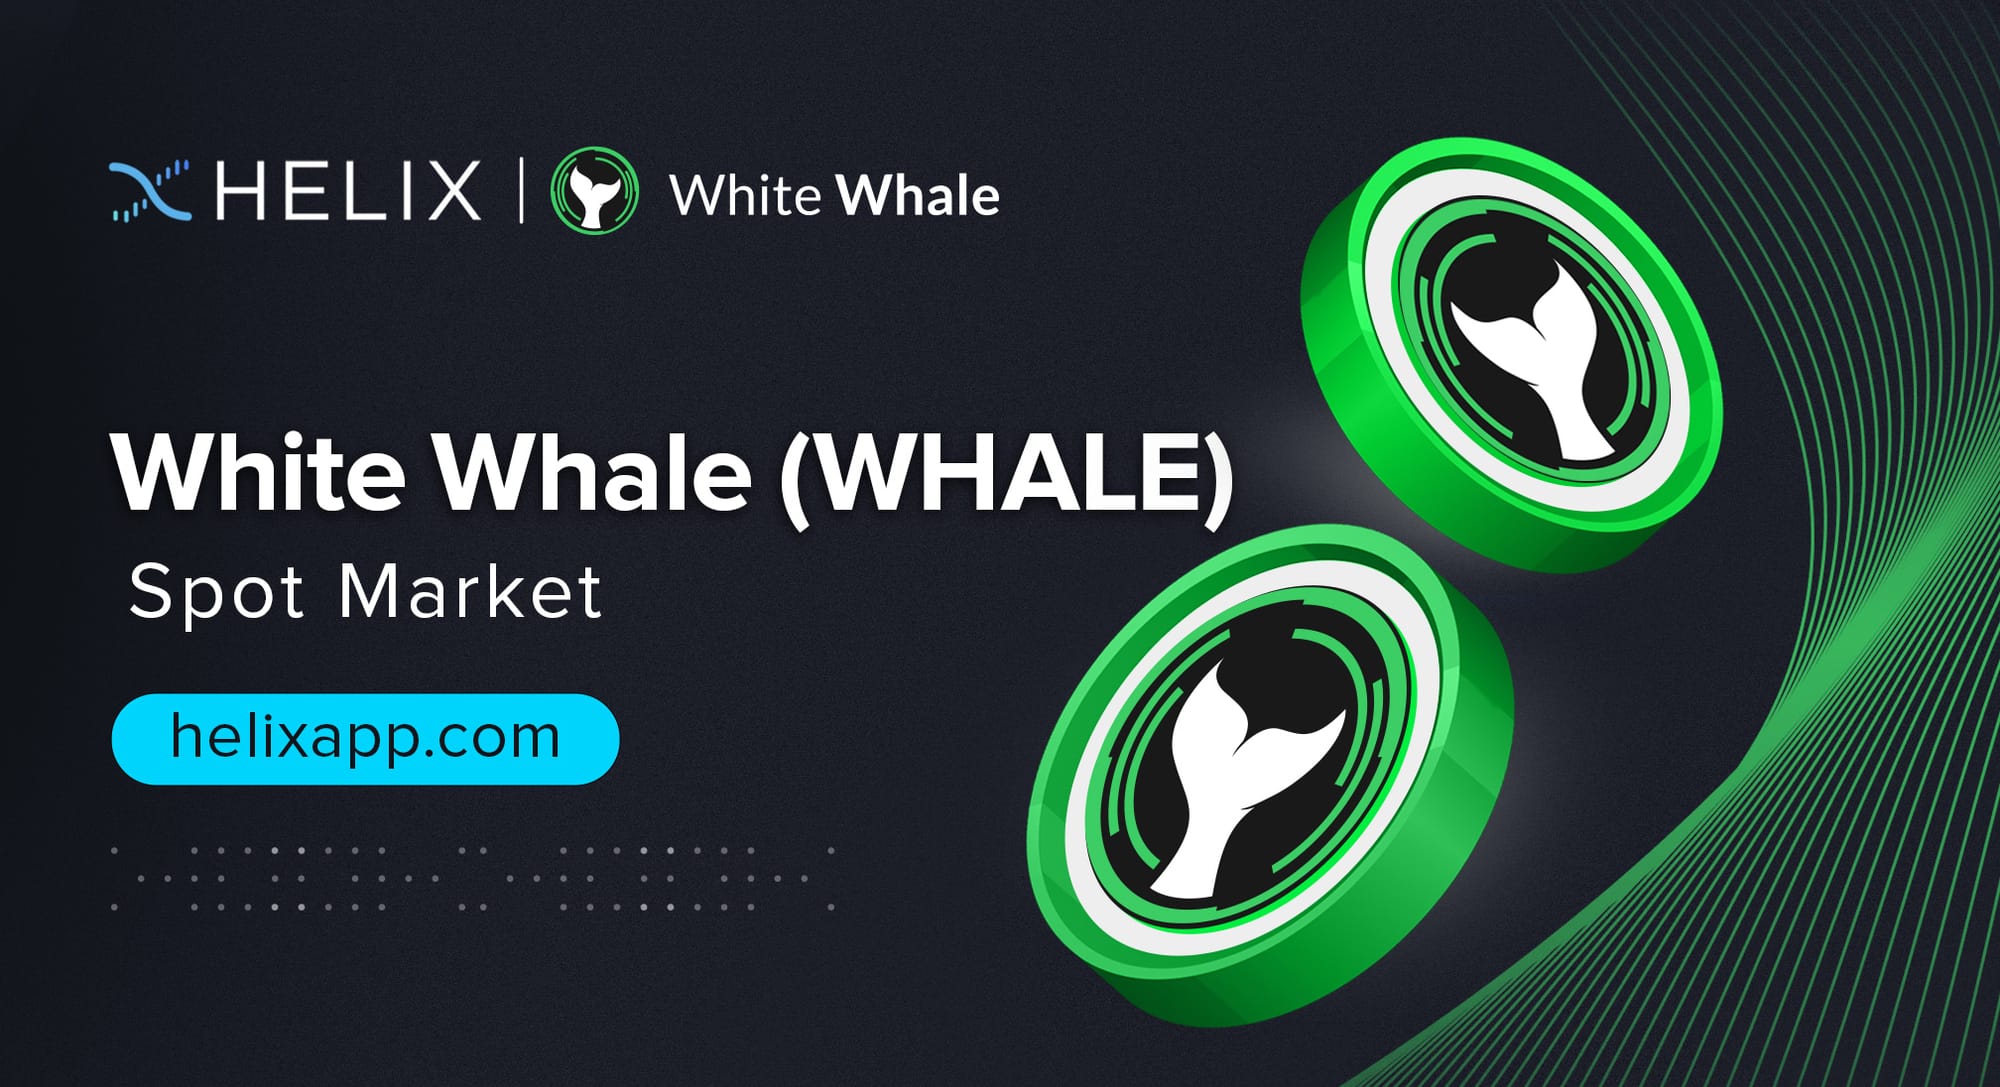 Decentralized White Whale (WHALE) Spot Market Listing on Helix